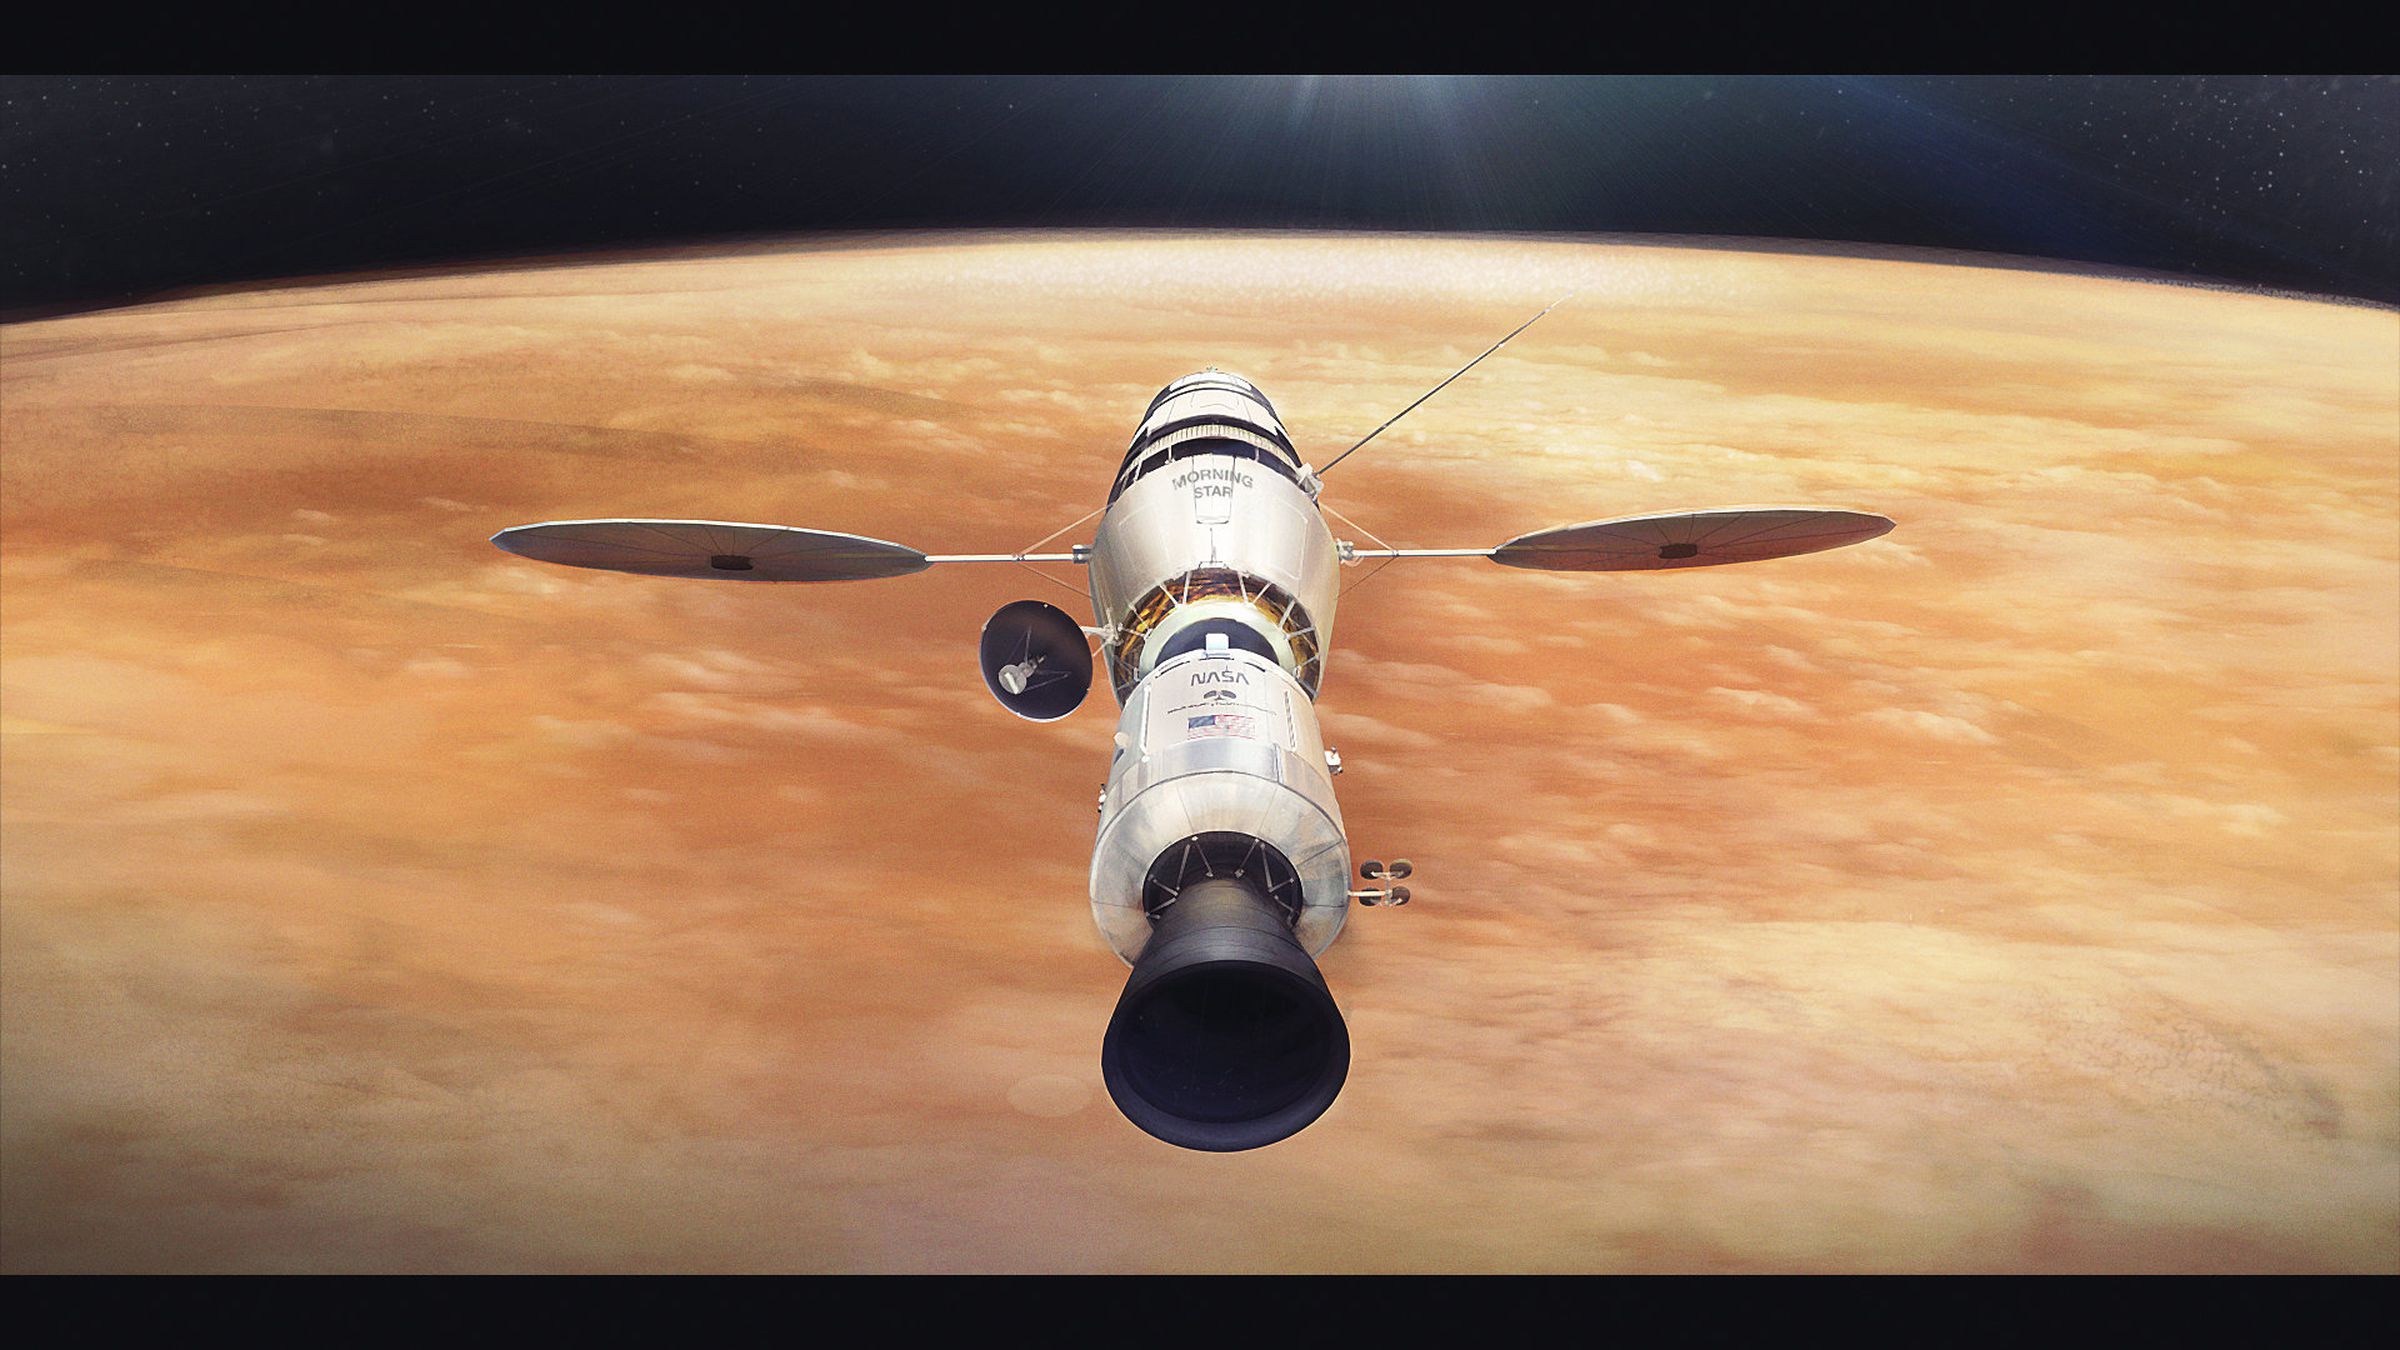 Morning Star spacecraft, derived from Apollo and Skylab program, is approaching Venus on a manned flyby mission.